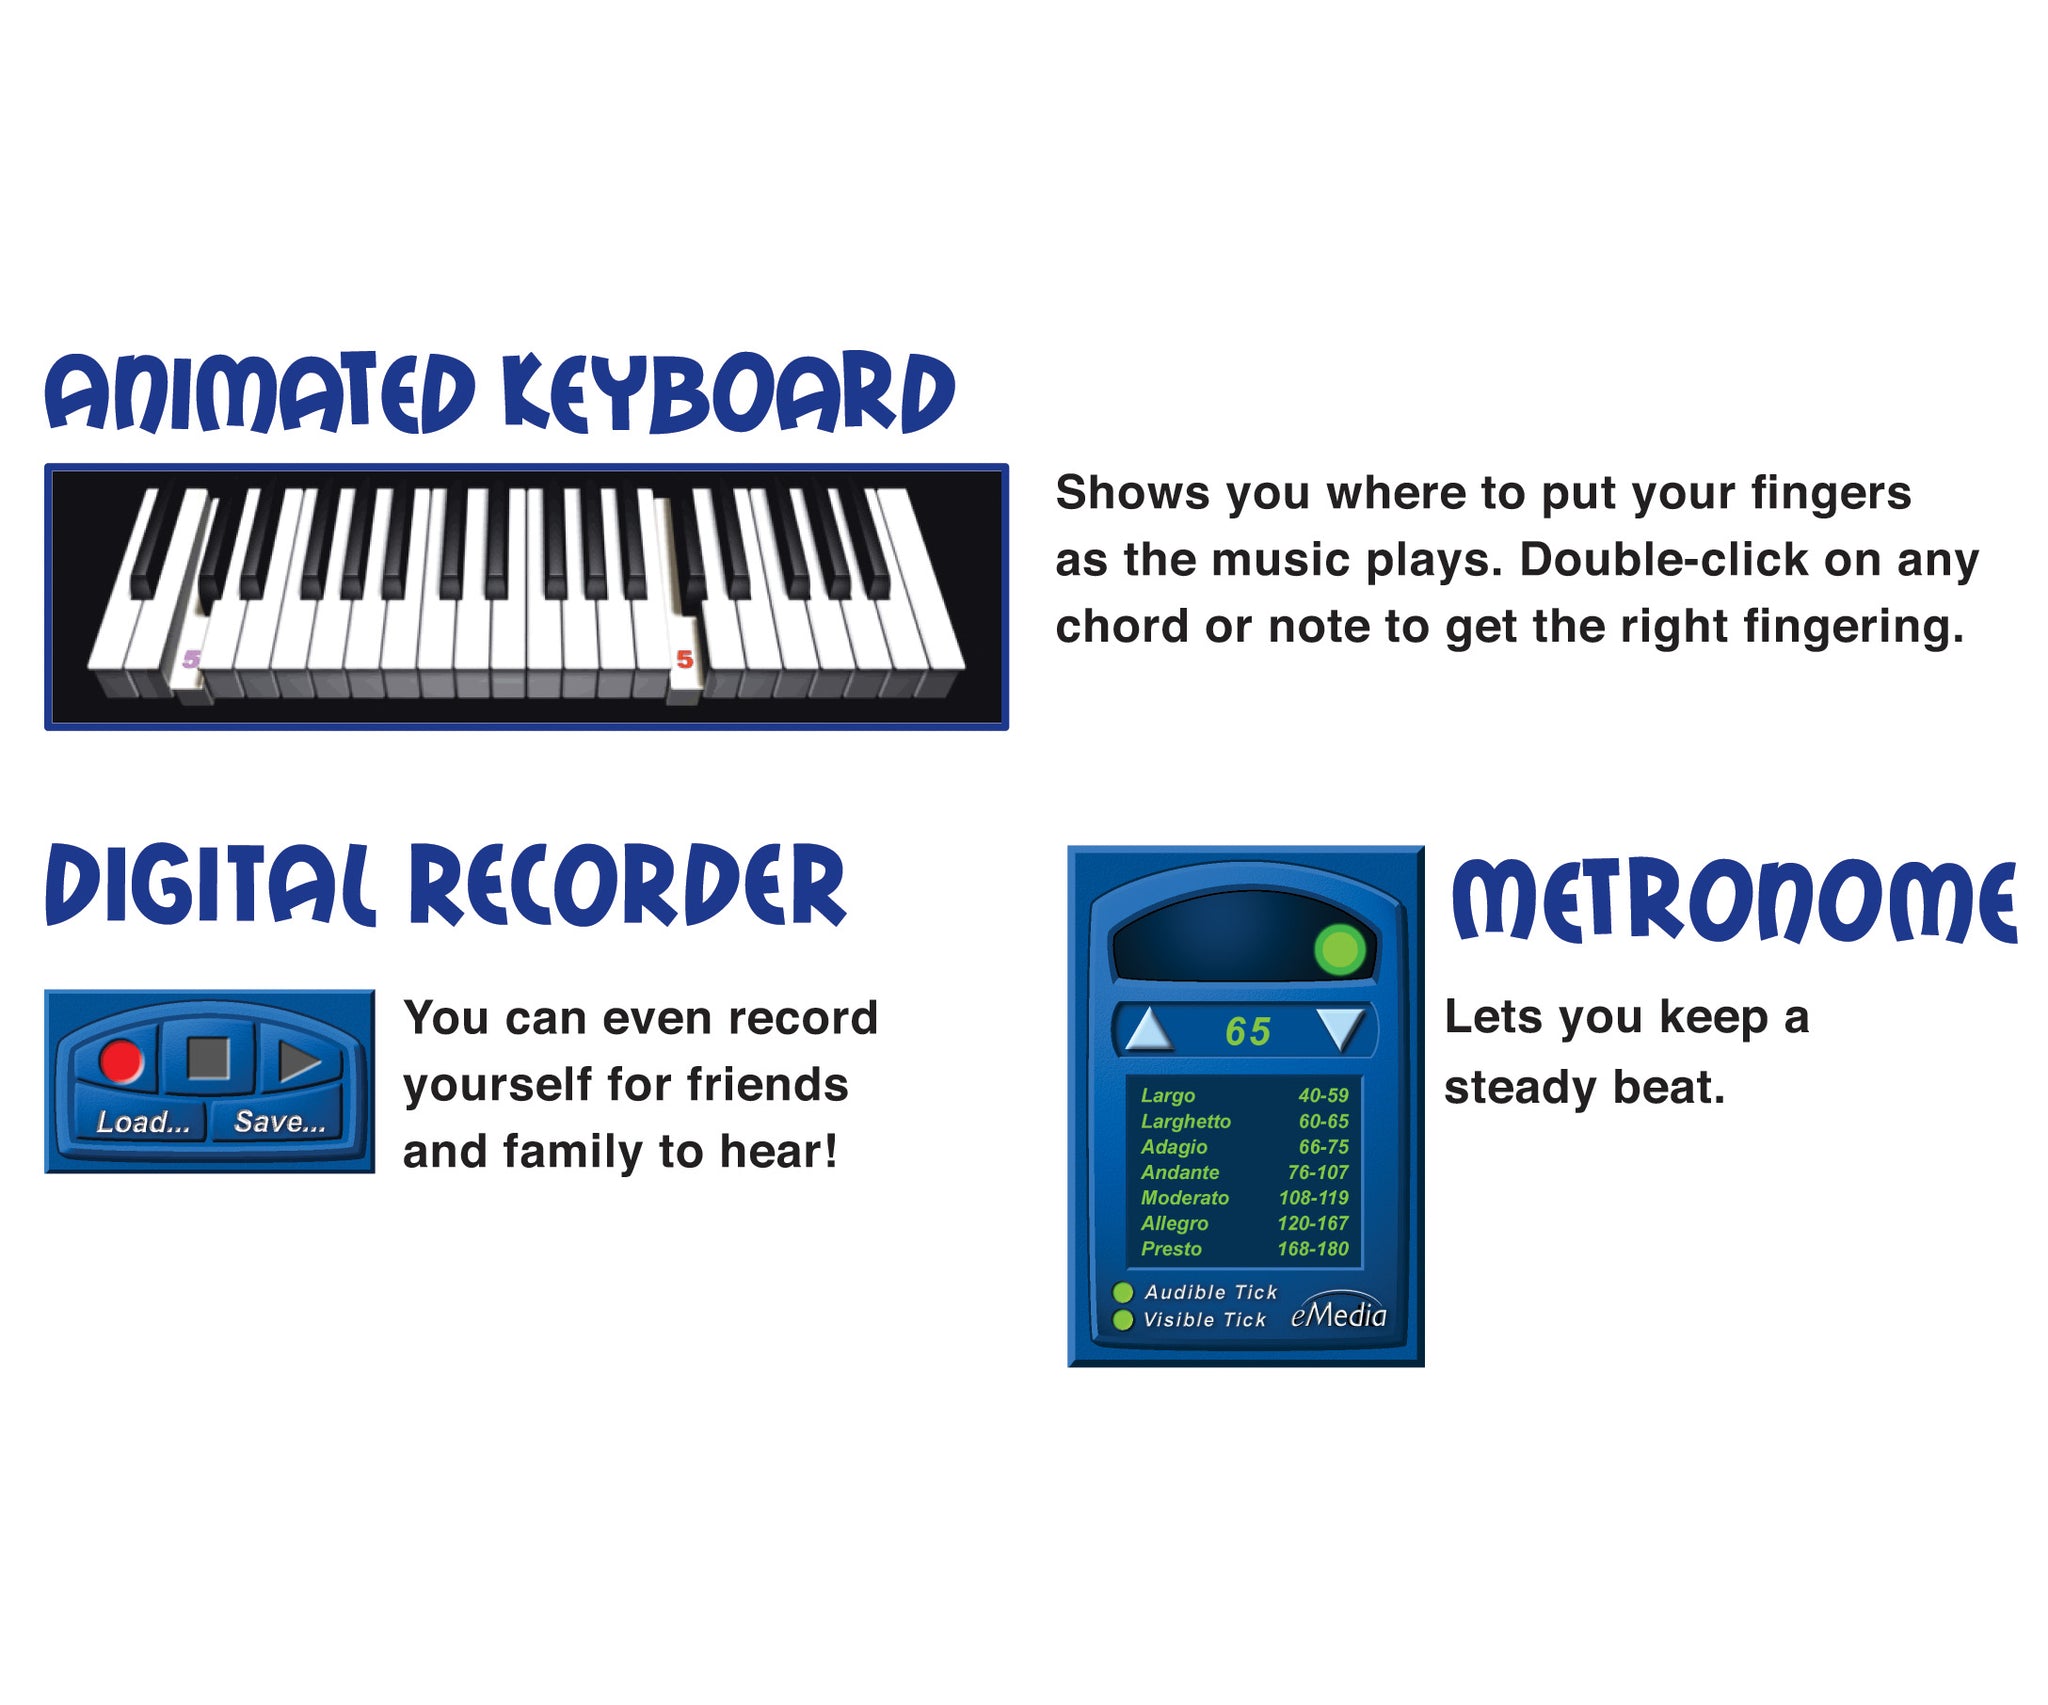 Learn the piano online with half off this award-winning app